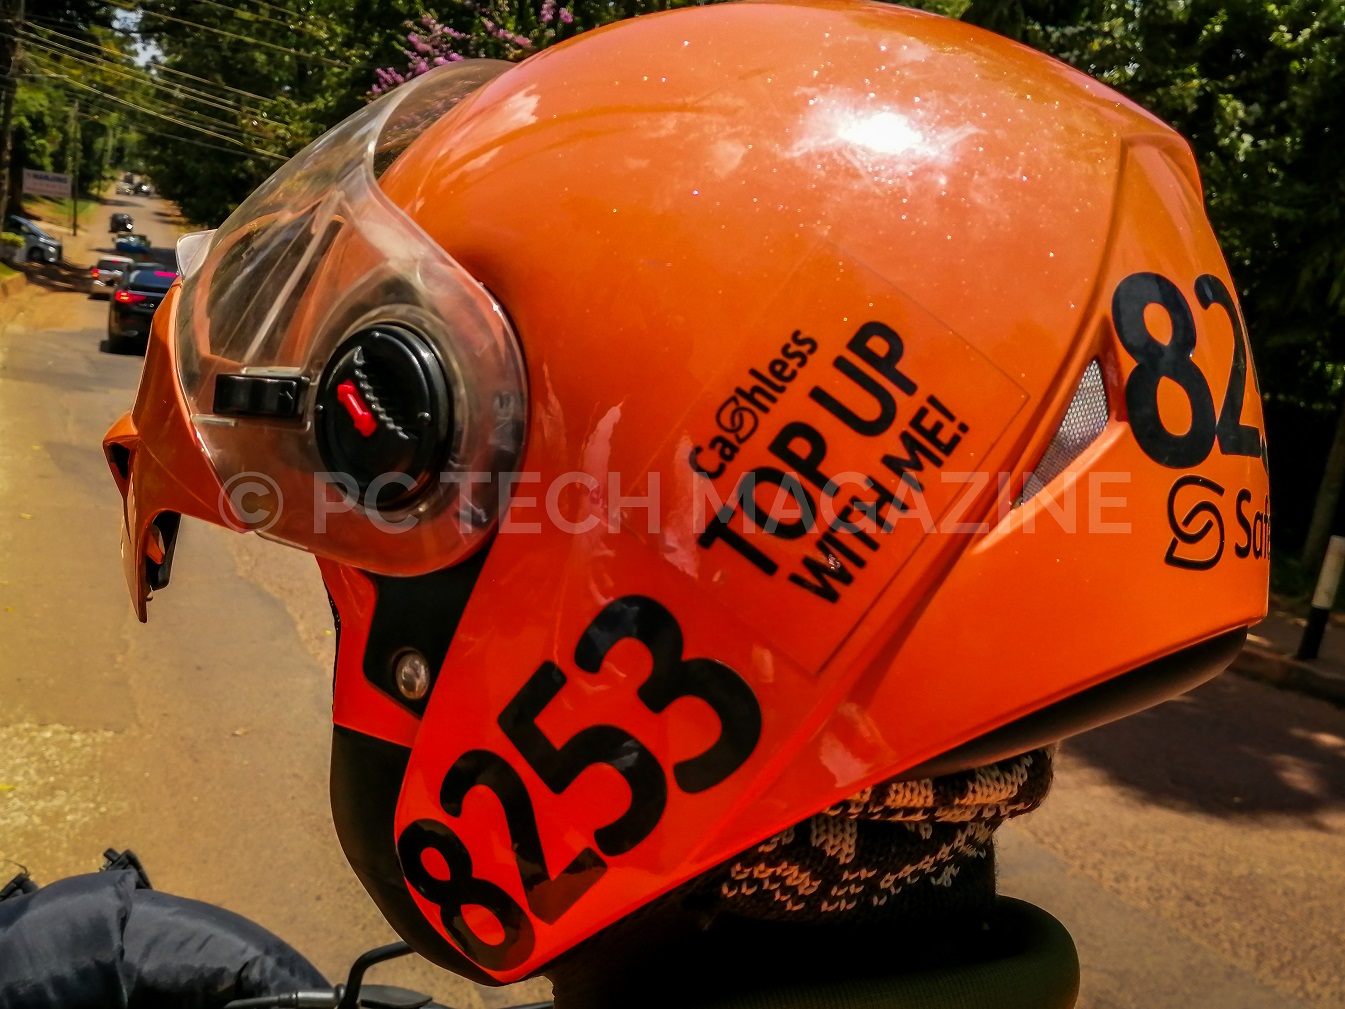 Safeboda riders permitted to sale credit to their customers have a sticker that reads "Cashless Top With Me" on their helmet | Photo by PC TECH MAGAZINE/Olupot Nathan Ernest.